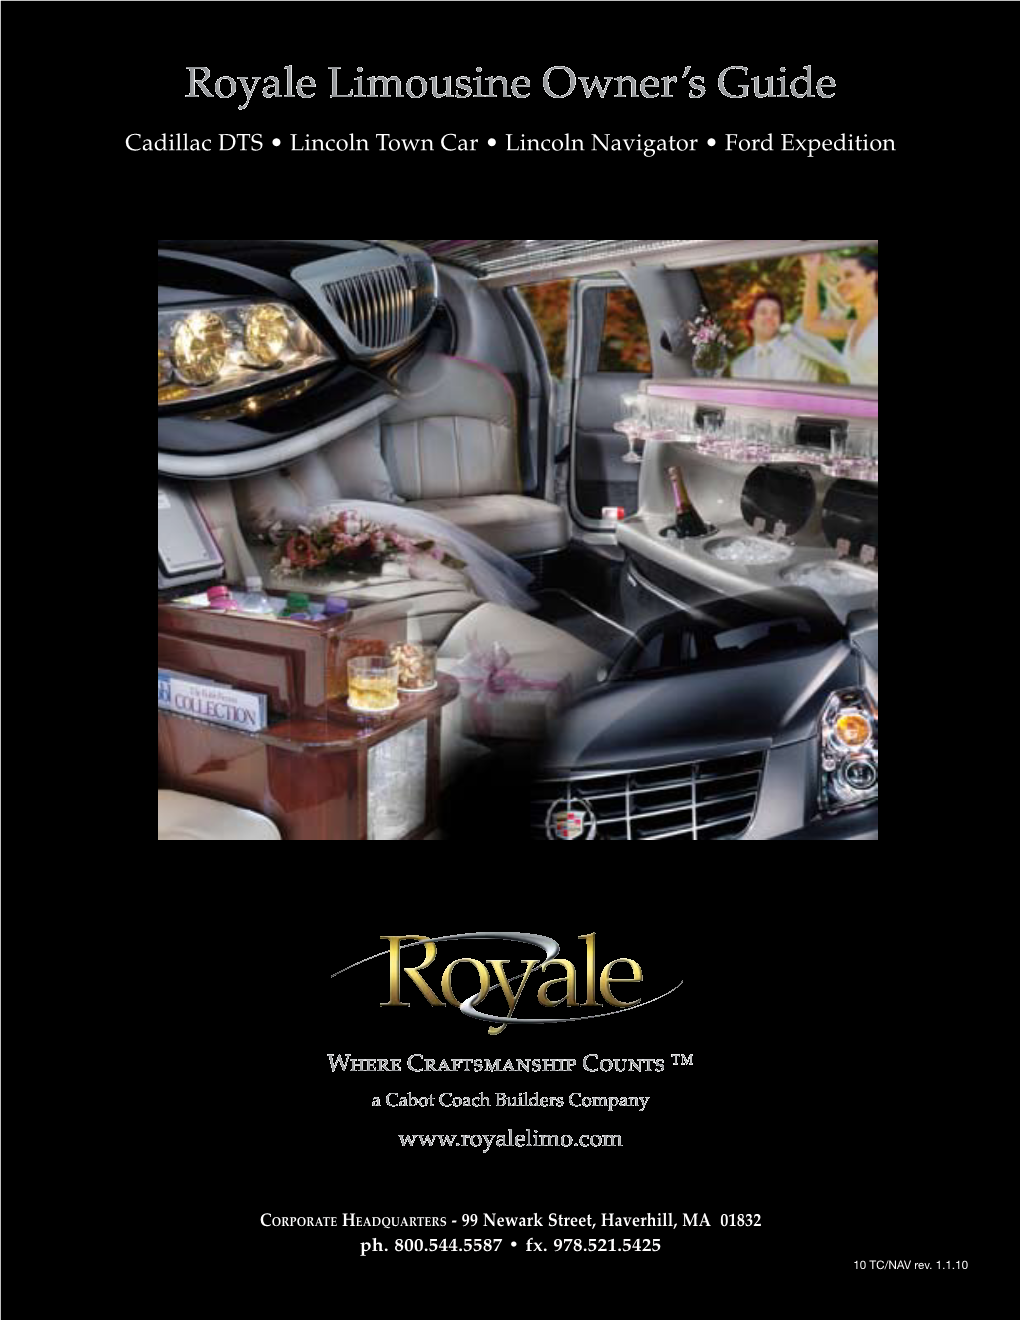 2010 Royale Limousine Owners Guide